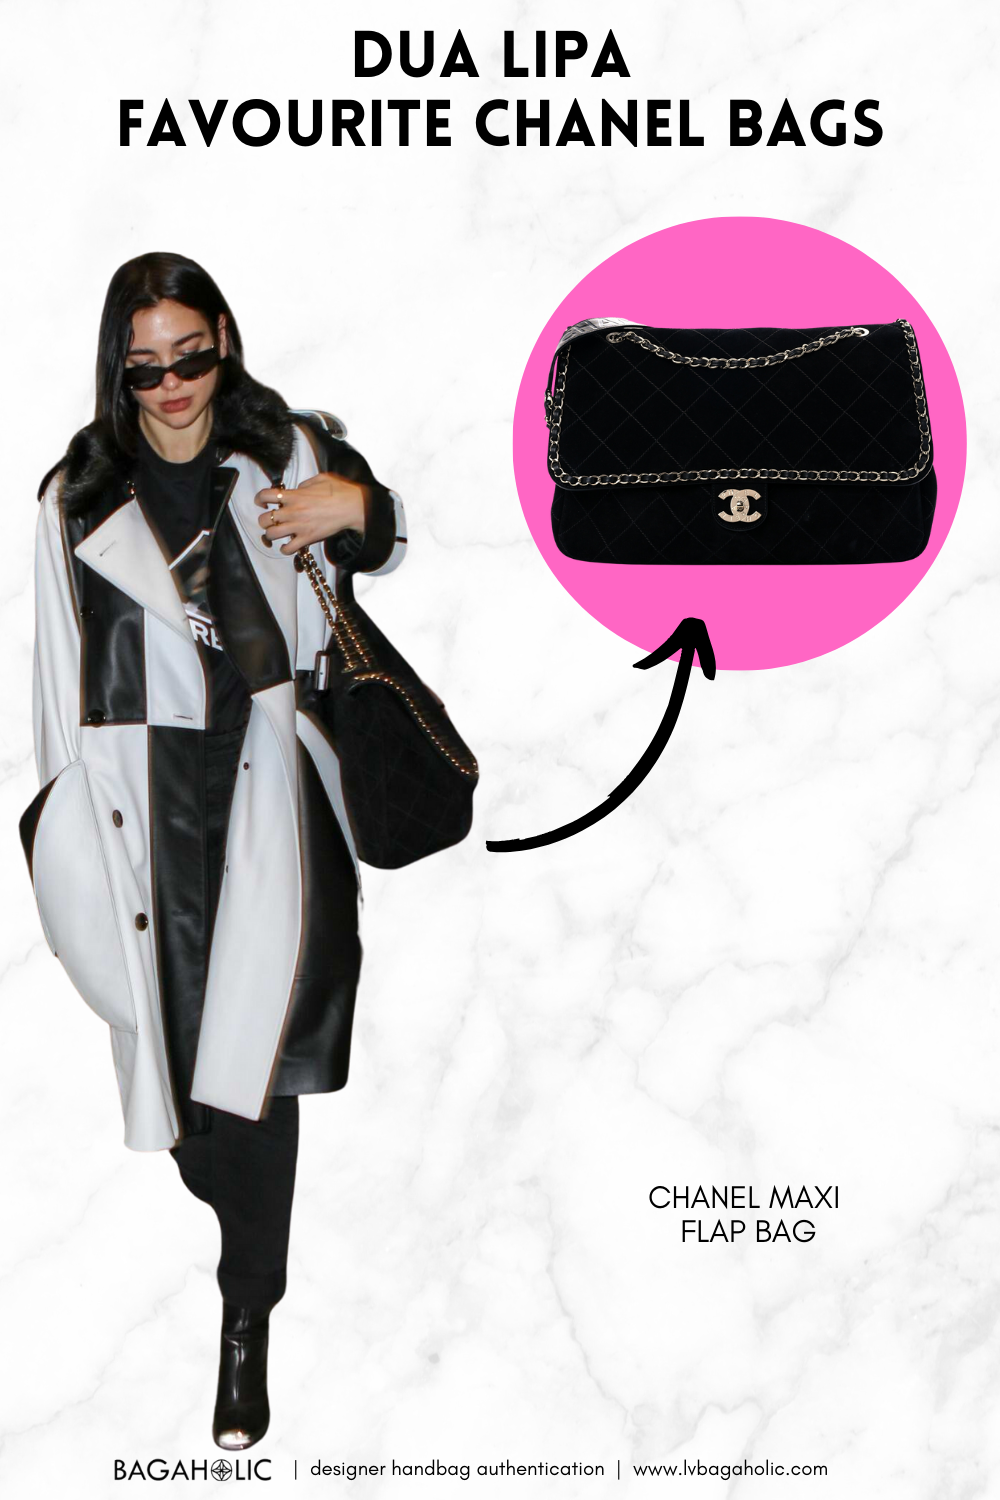 100 Celebs and Their Favorite Chanel Bags (Part 1)Dua Lipa and  her  CHANEL bag